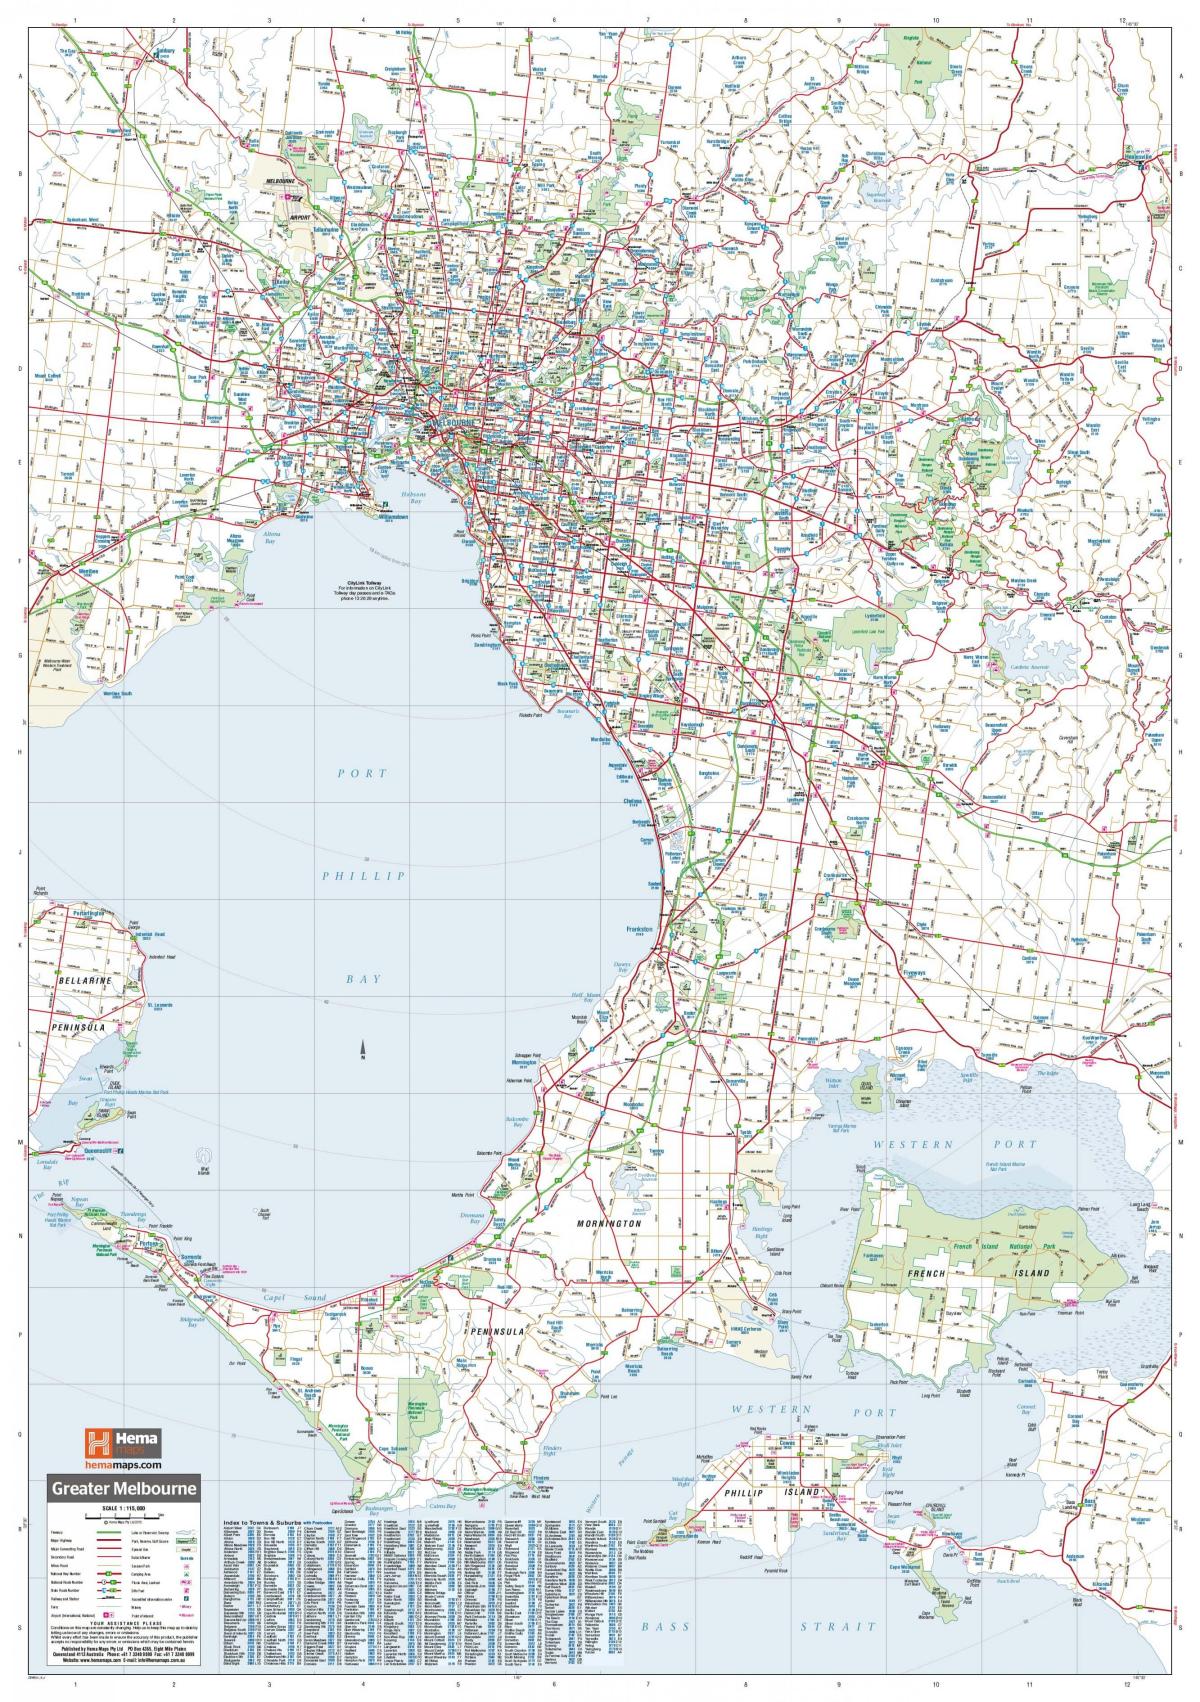 Melbourne streets map